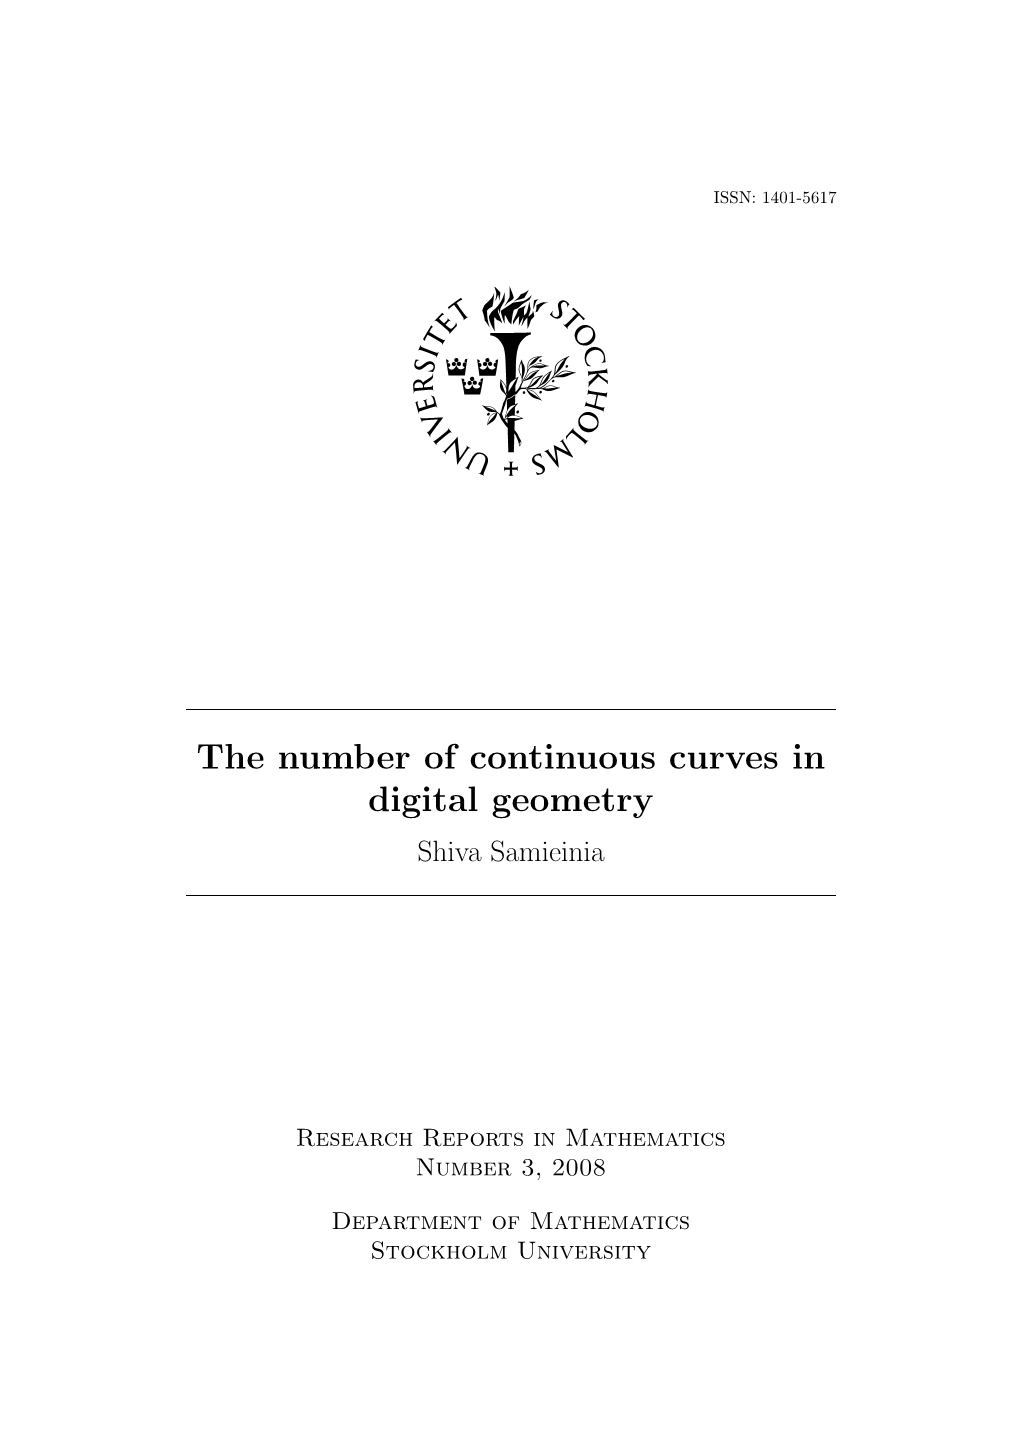 The Number of Continuous Curves in Digital Geometry Shiva Samieinia